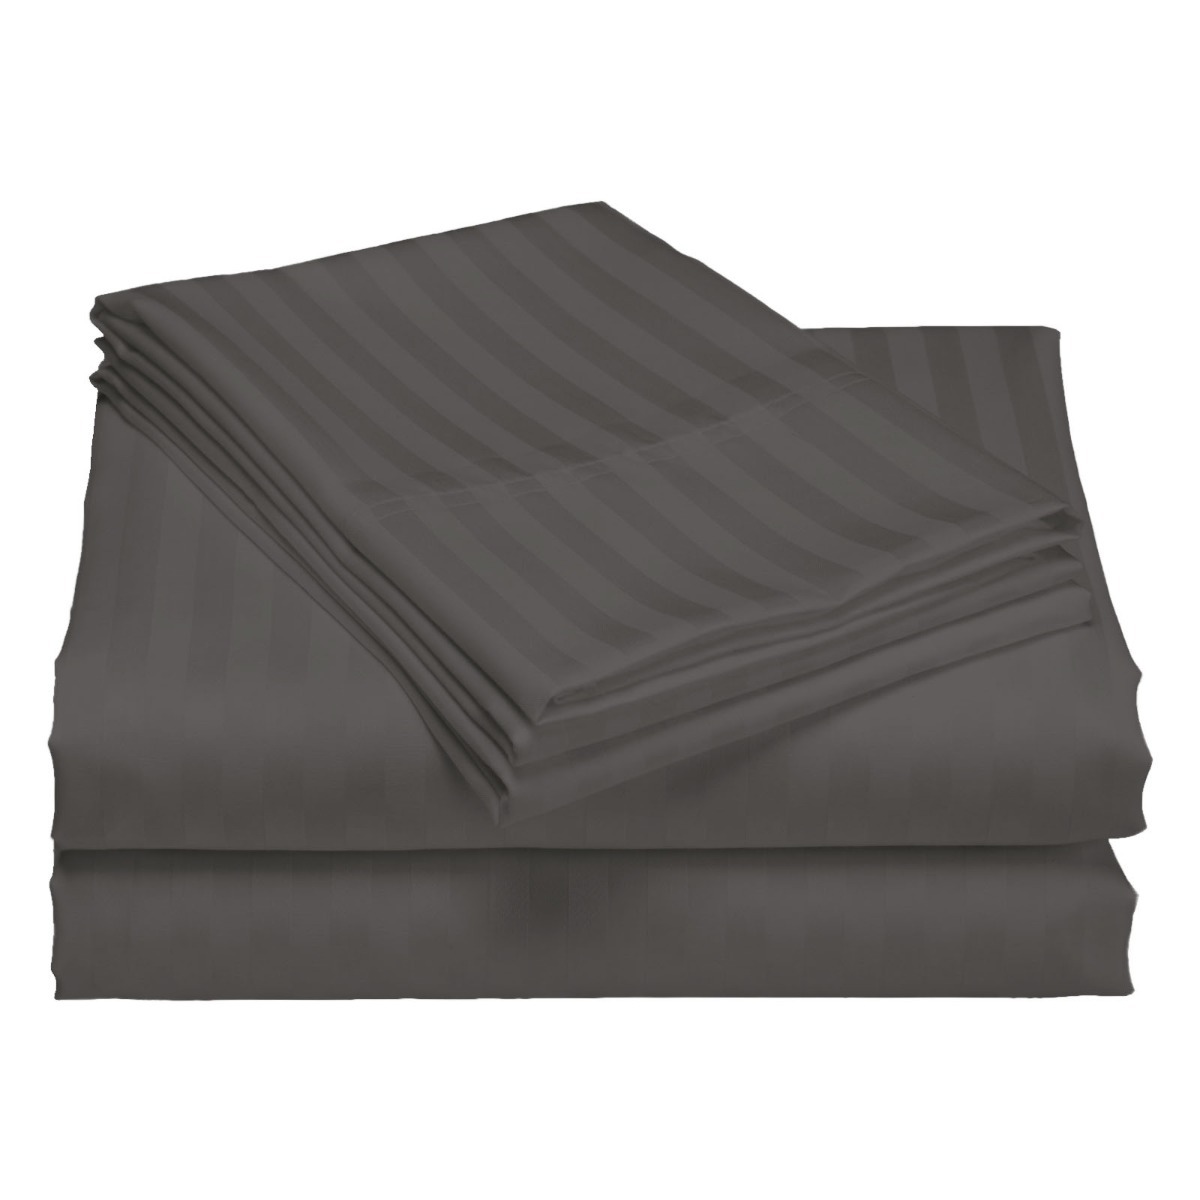 Royal Comfort 1200TC Quilt Cover Set Damask Cotton Blend Luxury Sateen Bedding – Queen – Charcoal Grey